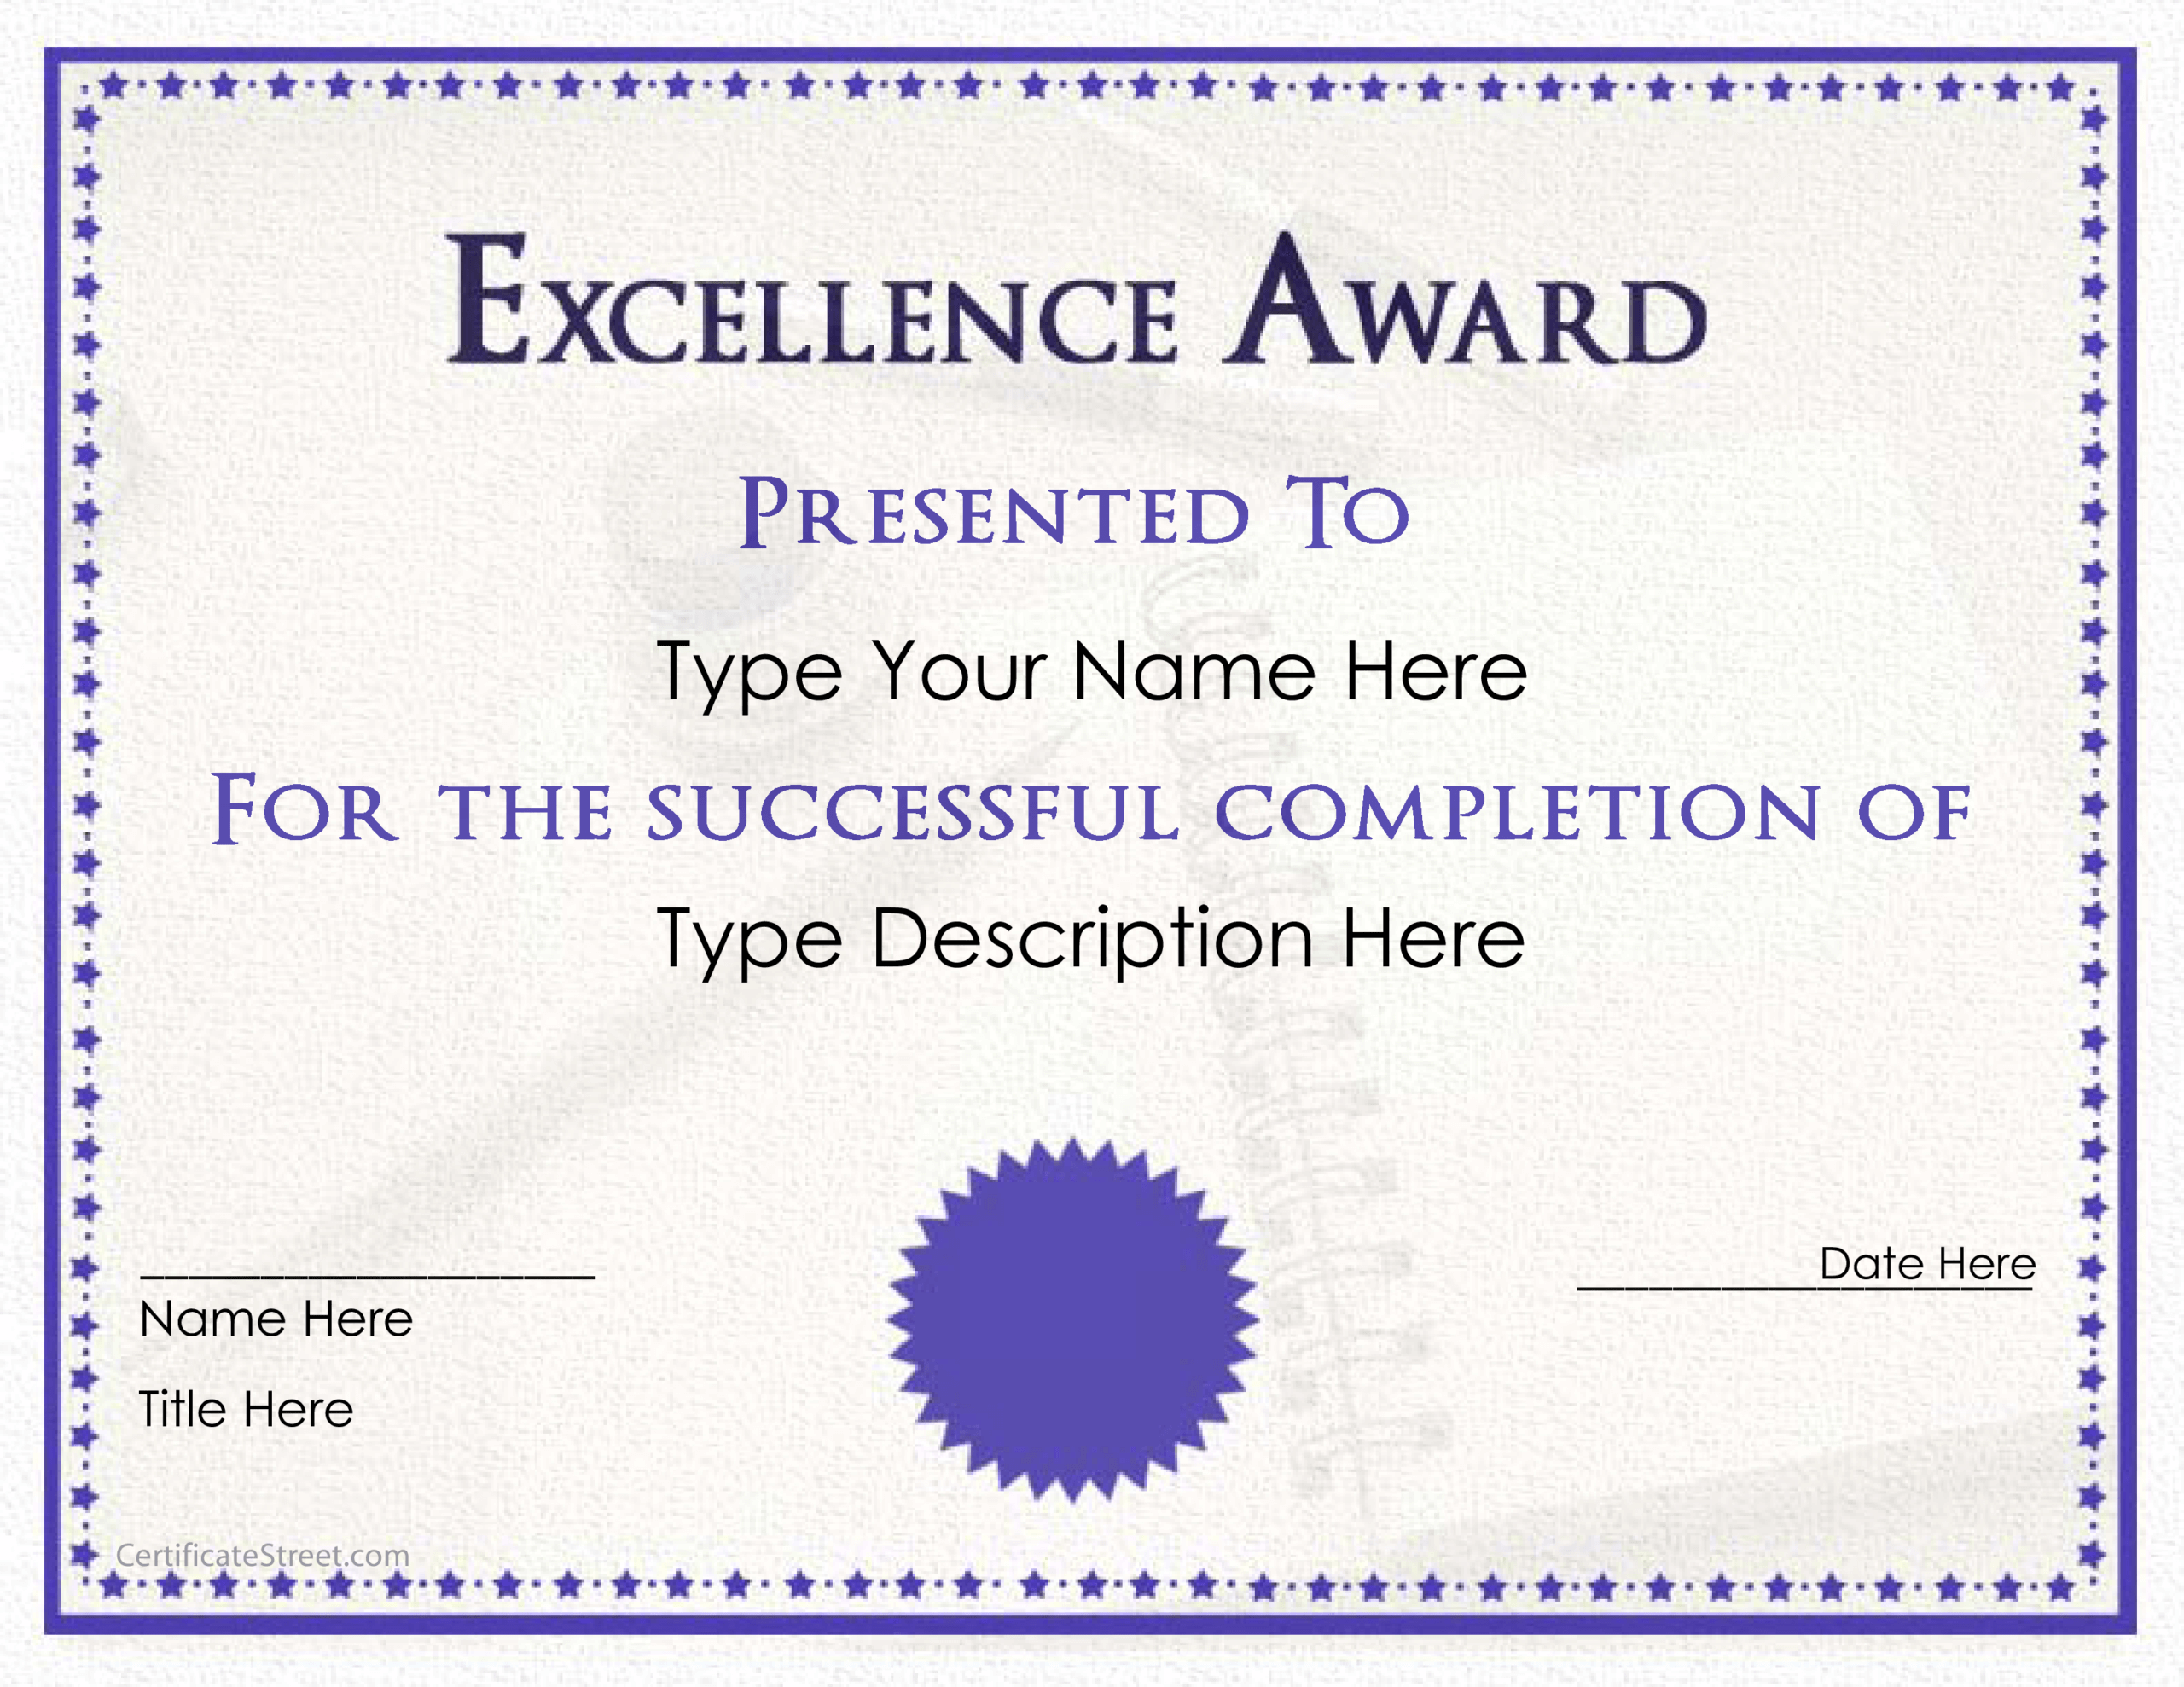 Excellence Award Certificate | Templates At With Award Of Excellence Certificate Template